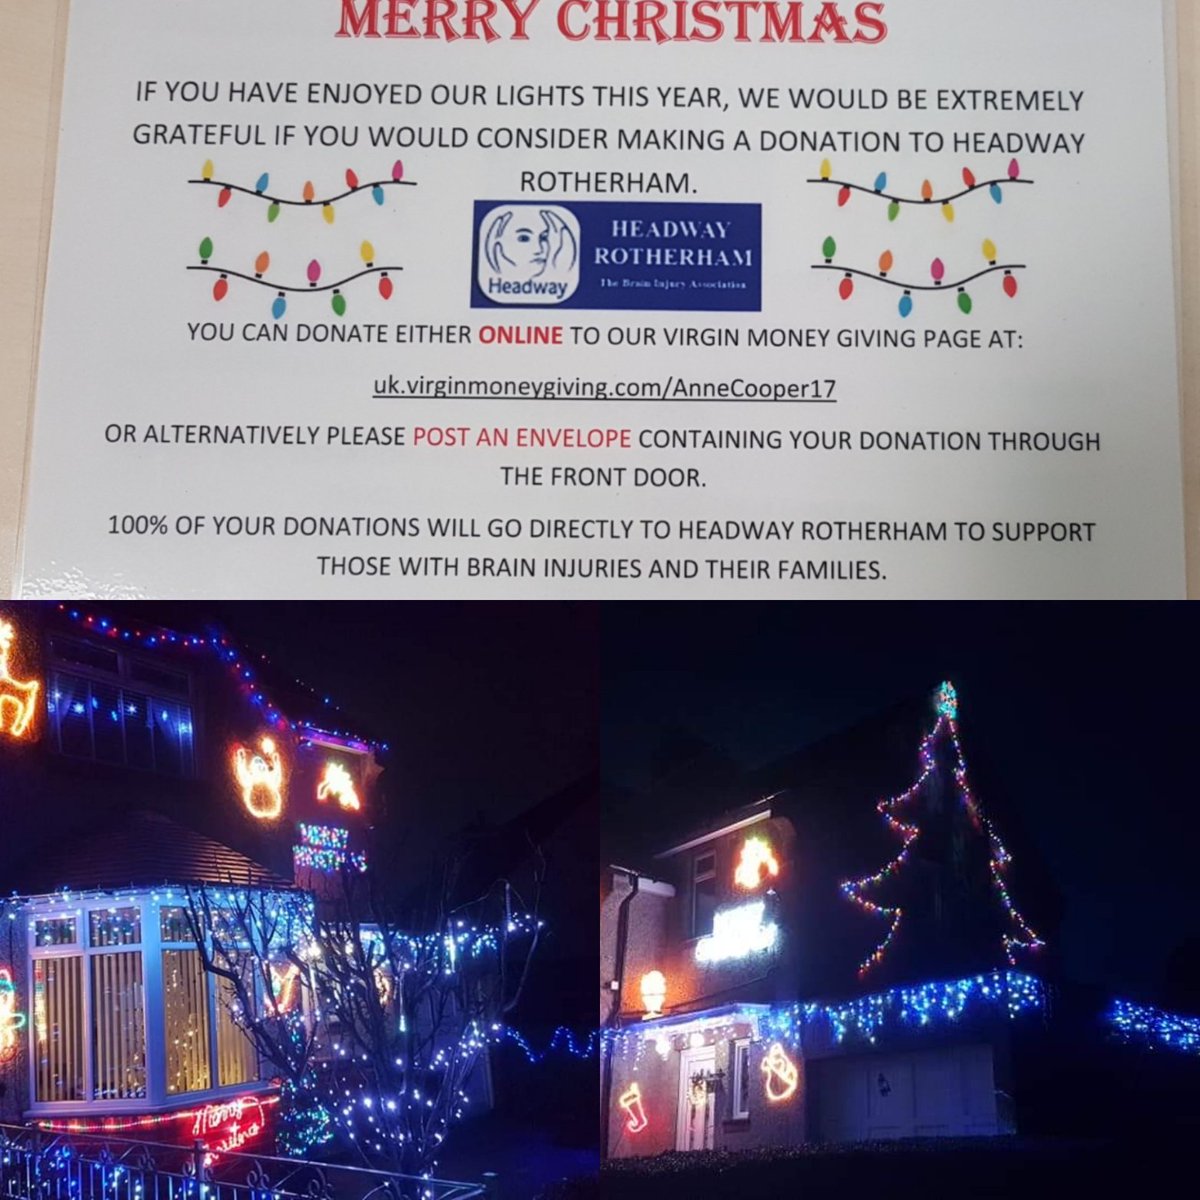 The lights are still going strong and any donations will be much appreciated by @Headway_Roth #rotherhamiswonderful #Sheffieldissuper #christmas #braininjury #fundraising 🎄🎄🎄